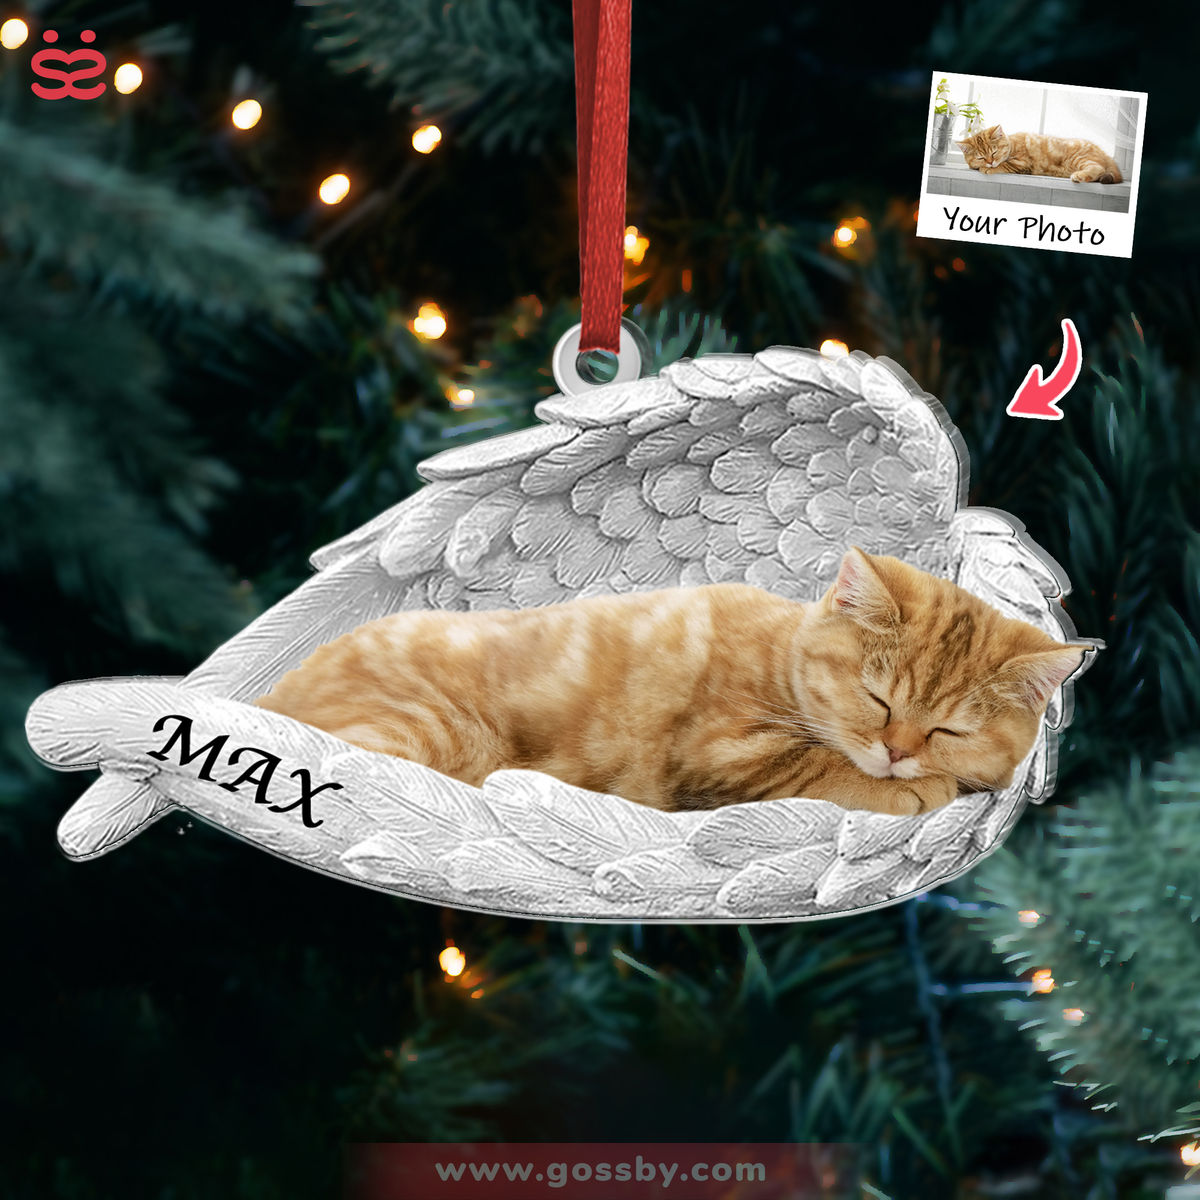 Cat Acrylic Ornament - Customized Your Photo Ornament - Sleeping Pet Within Angel Wings - Custom Ornament from Photo, Christmas Gifts_1